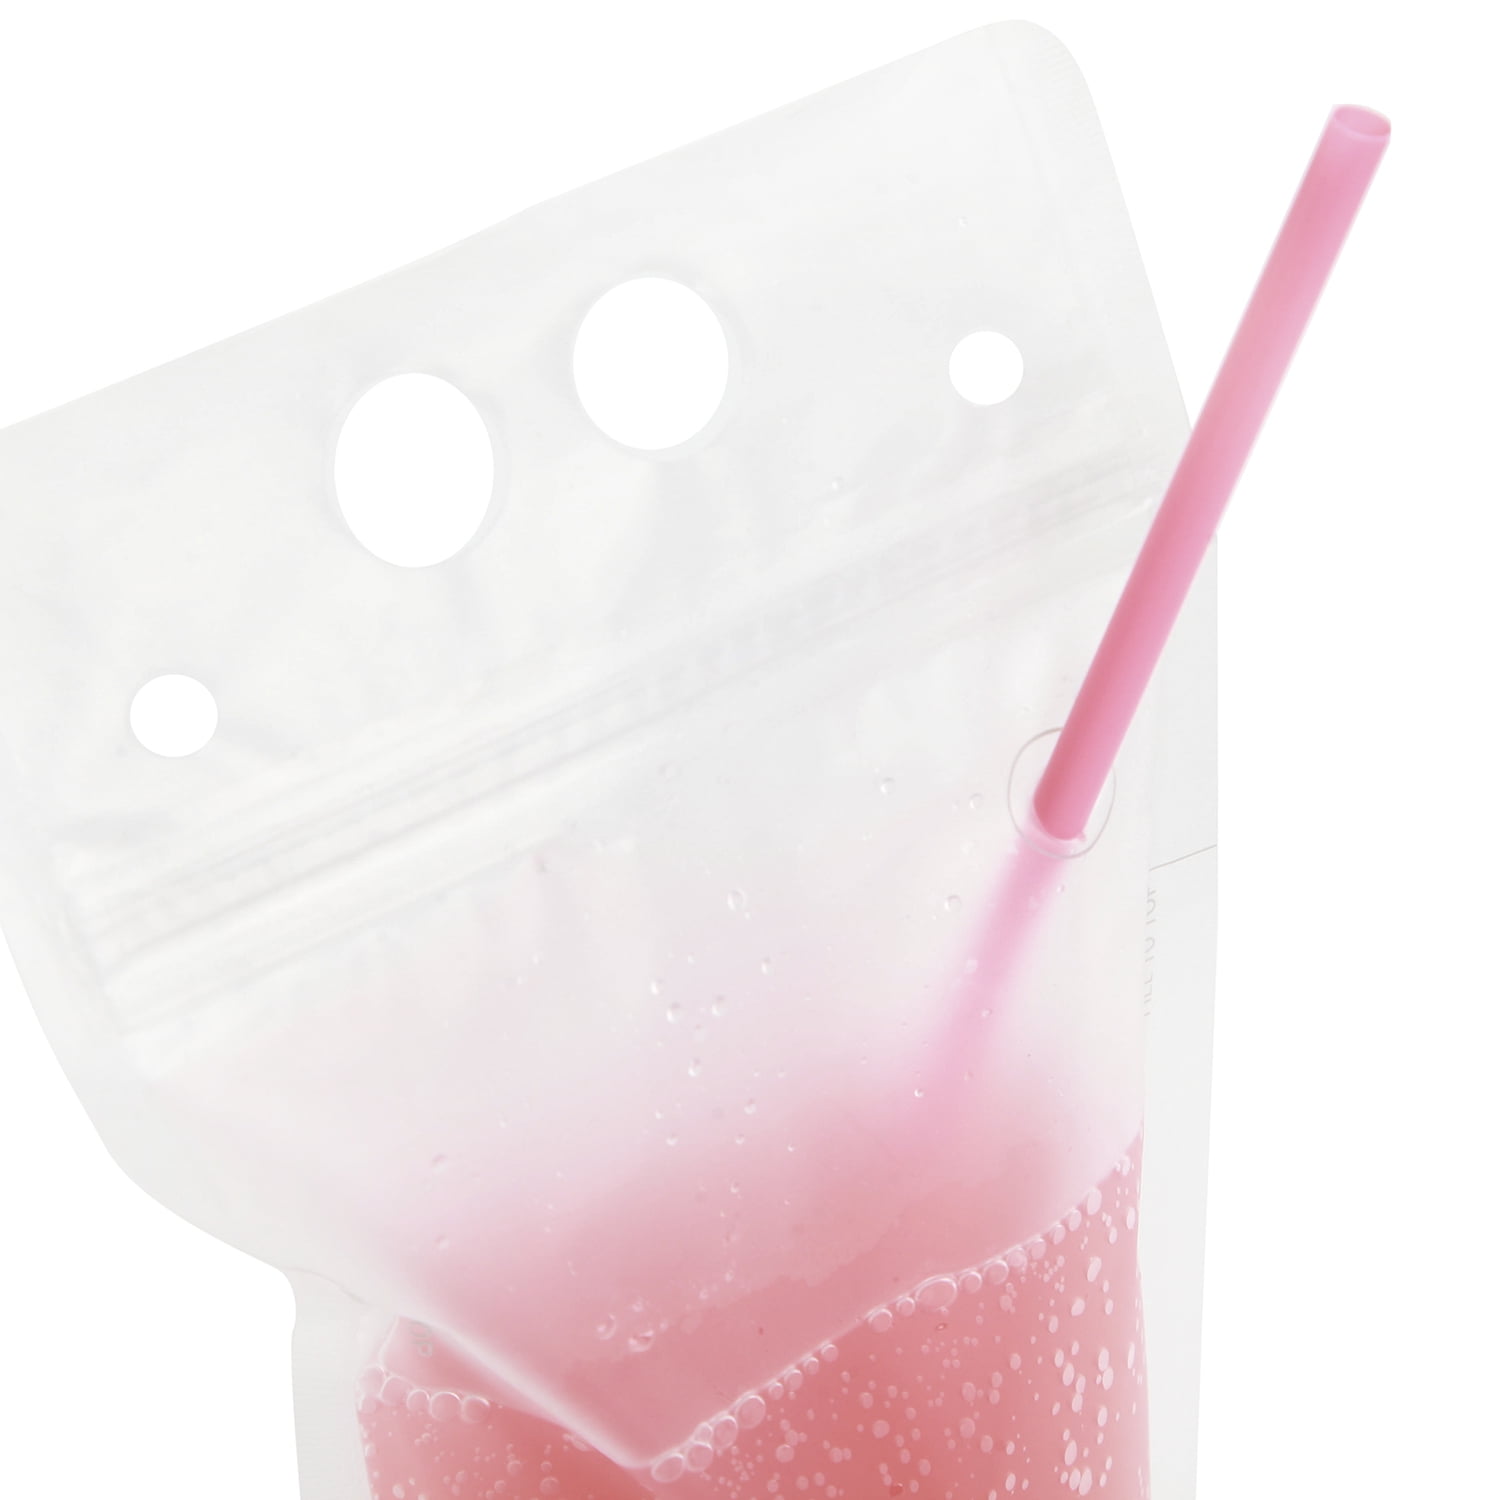 C Crystal Lemon 100pcs Drink Pouches with Straw Smoothie Bags Juice Pouches with 100 Drink Straws, Heavy Duty Hand-Held Translucent Reclosable Ice